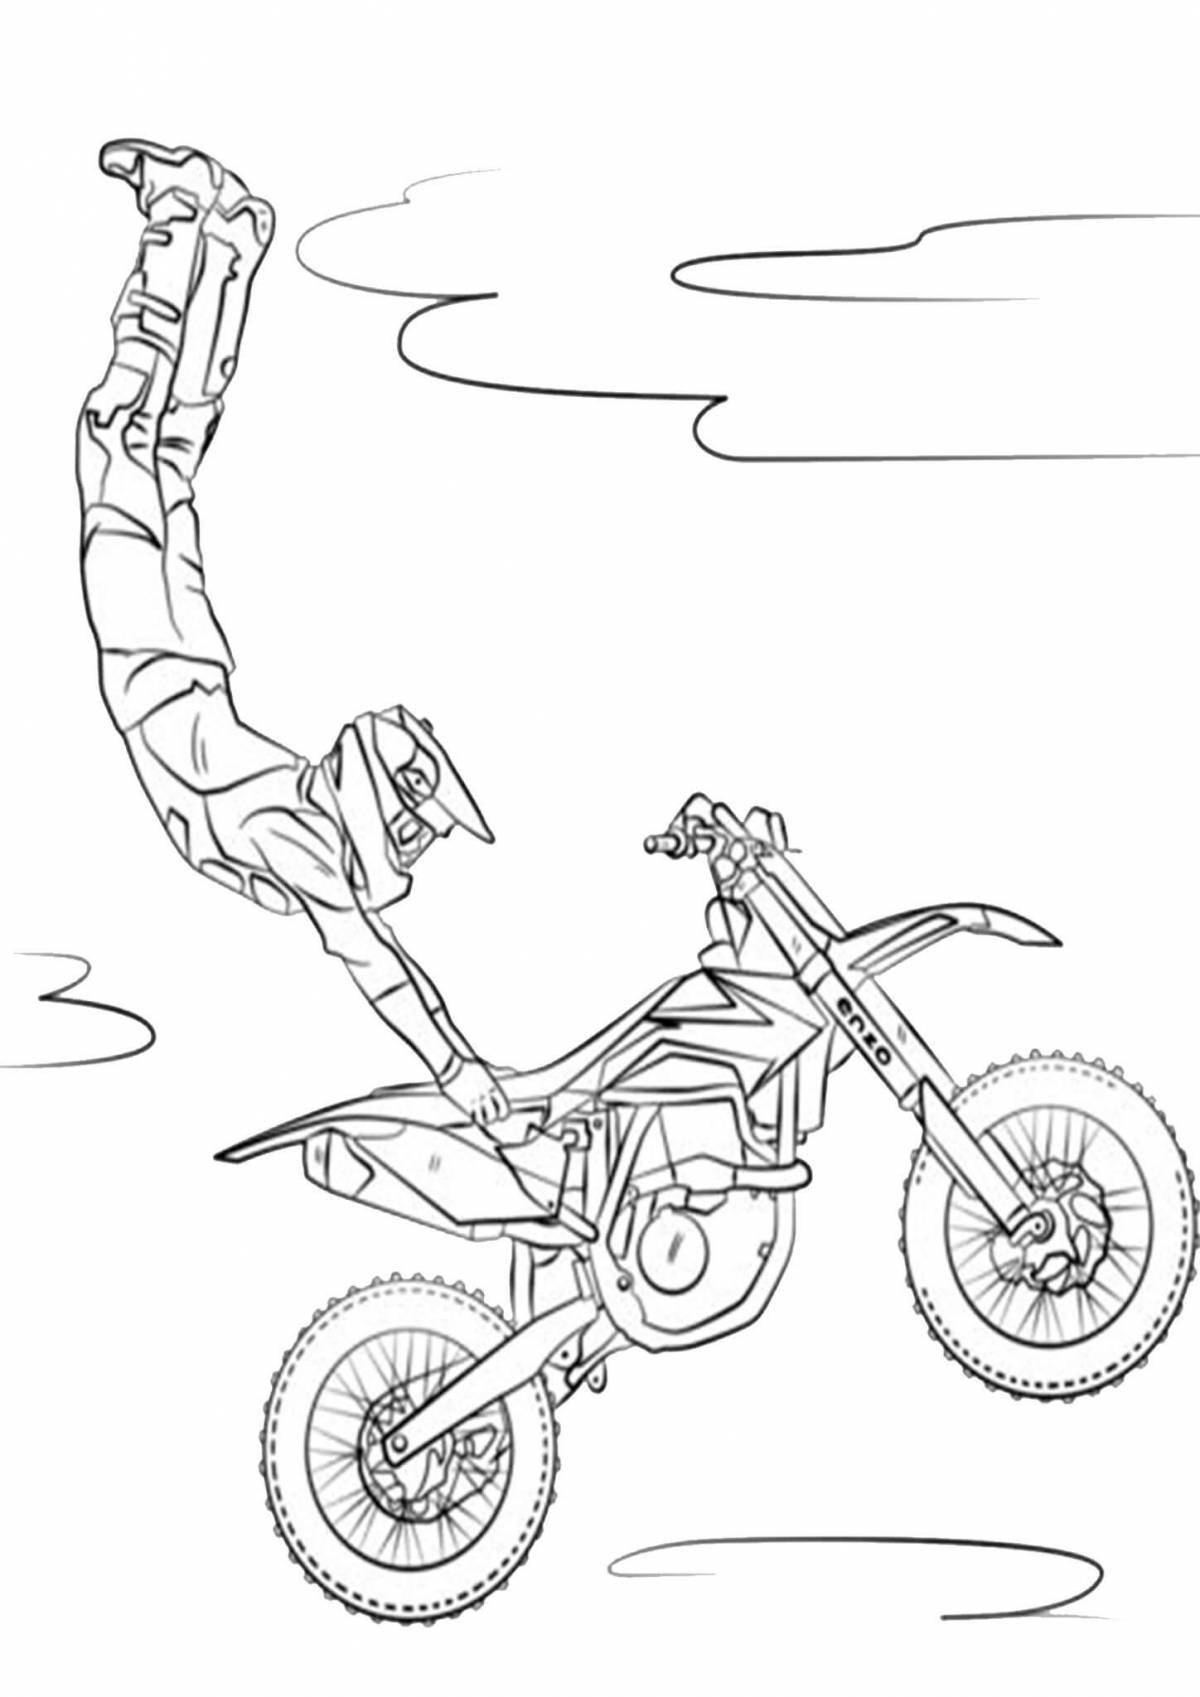 Crazy motocross coloring page